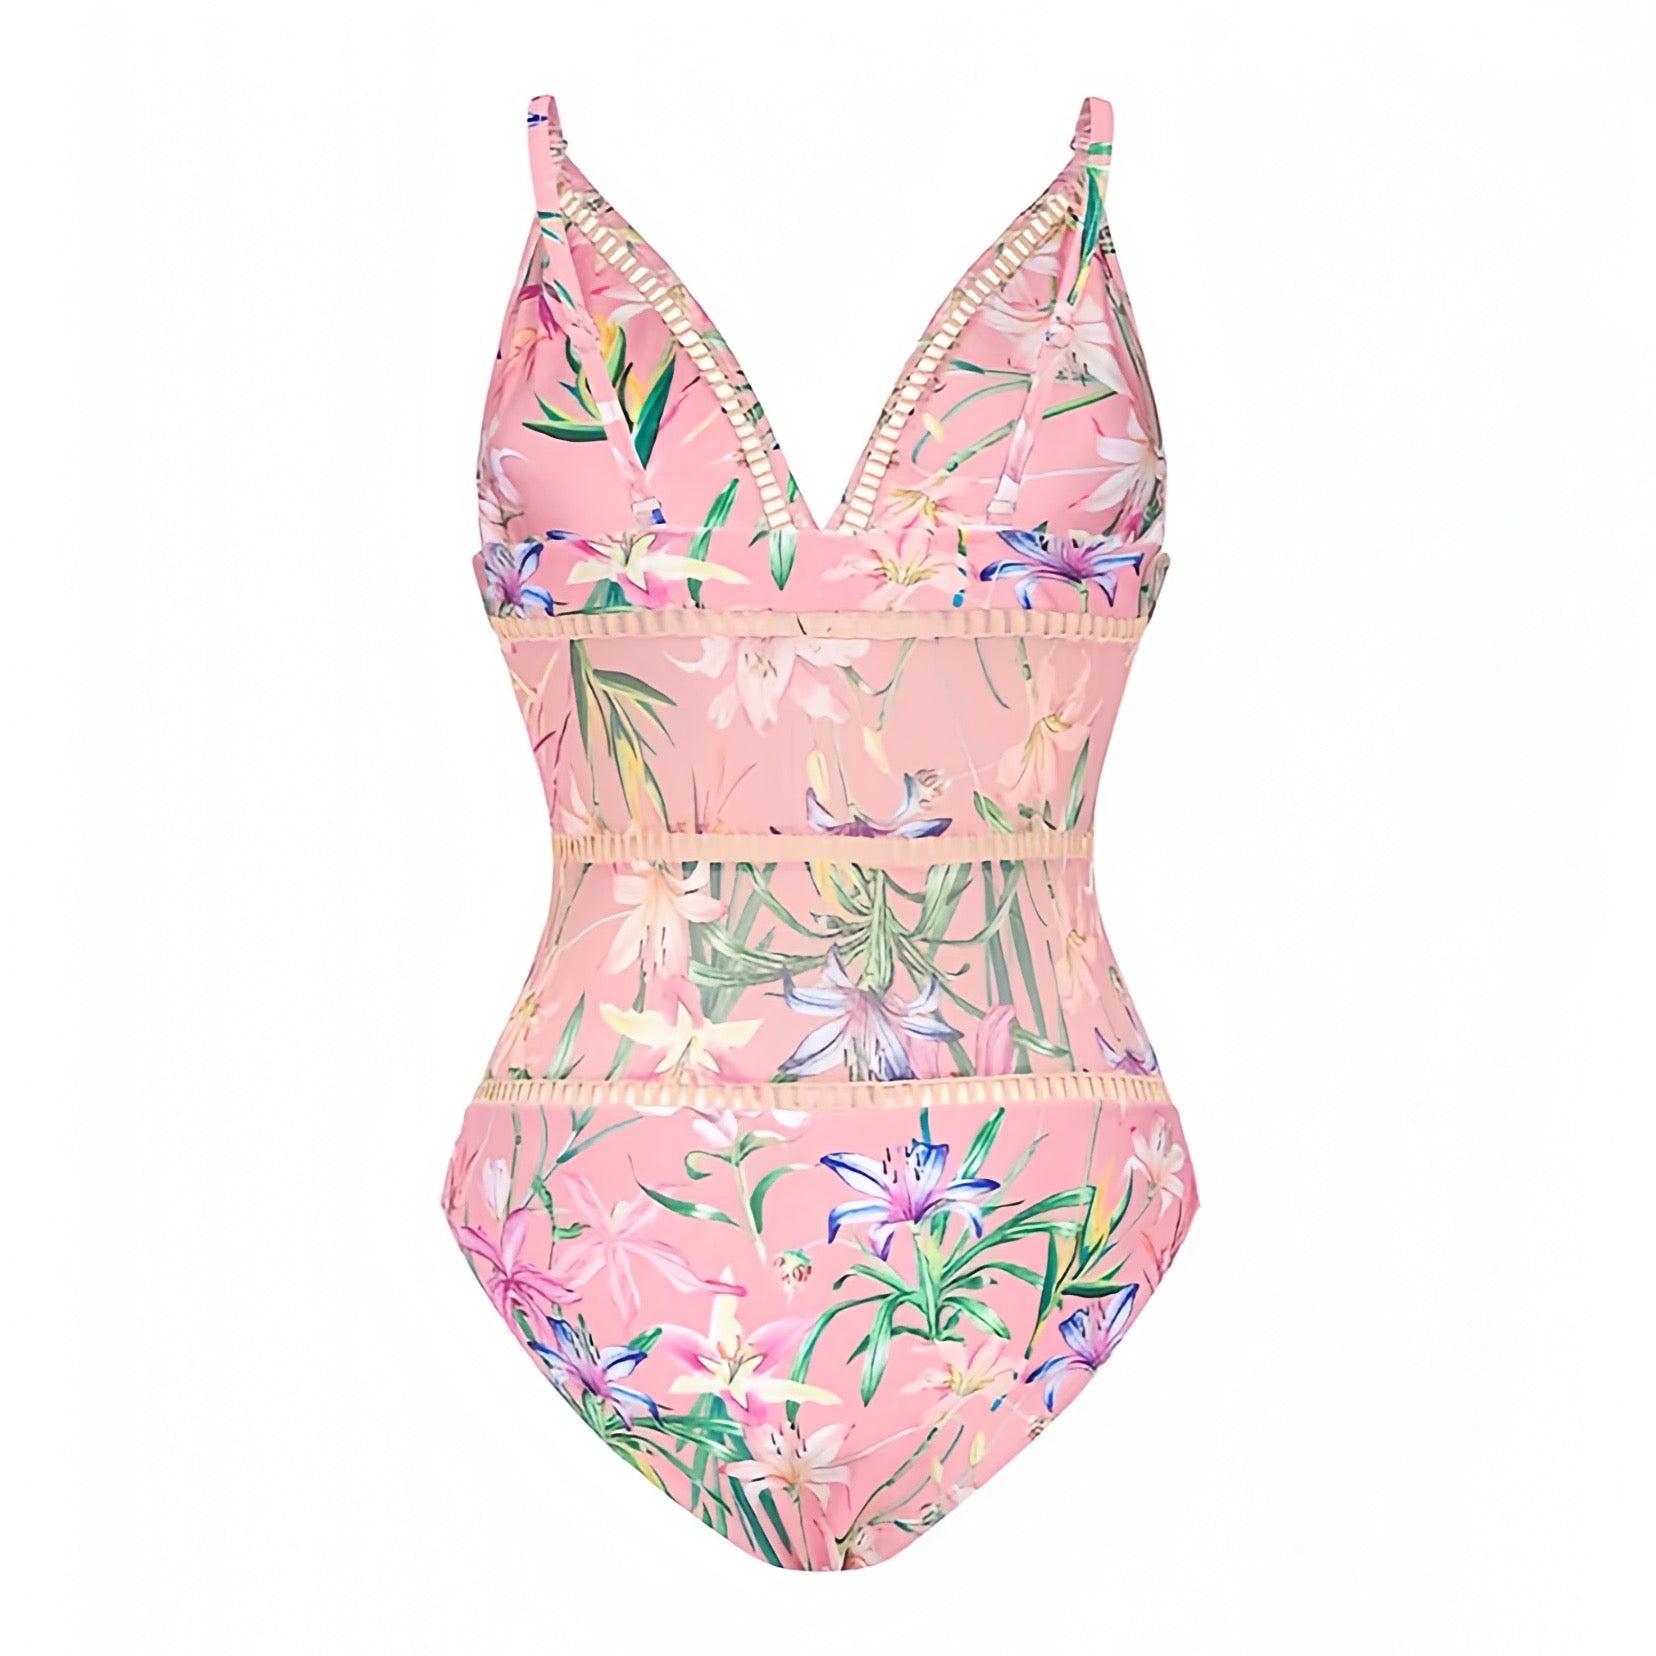 floral-print-light-pink-purple-yellow-green-multi-color-tropical-flower-striped-patterned-slim-fit-bodycon-embroidered-spaghetti-strap-v-neck-sleeveless-backless-open-back-wireless-push-up-cheeky-thong-boho-bohemian-modest-one-piece-swimsuit-swimwear-bathing-suit-women-ladies-teens-tweens-chic-trendy-spring-2024-summer-elegant-feminine-preppy-style-hawaiian-vacation-beach-wear-revolve-altard-state-loveshackfancy-frankies-bikinis-blackbough-kulakinis-fillyboo-dupe